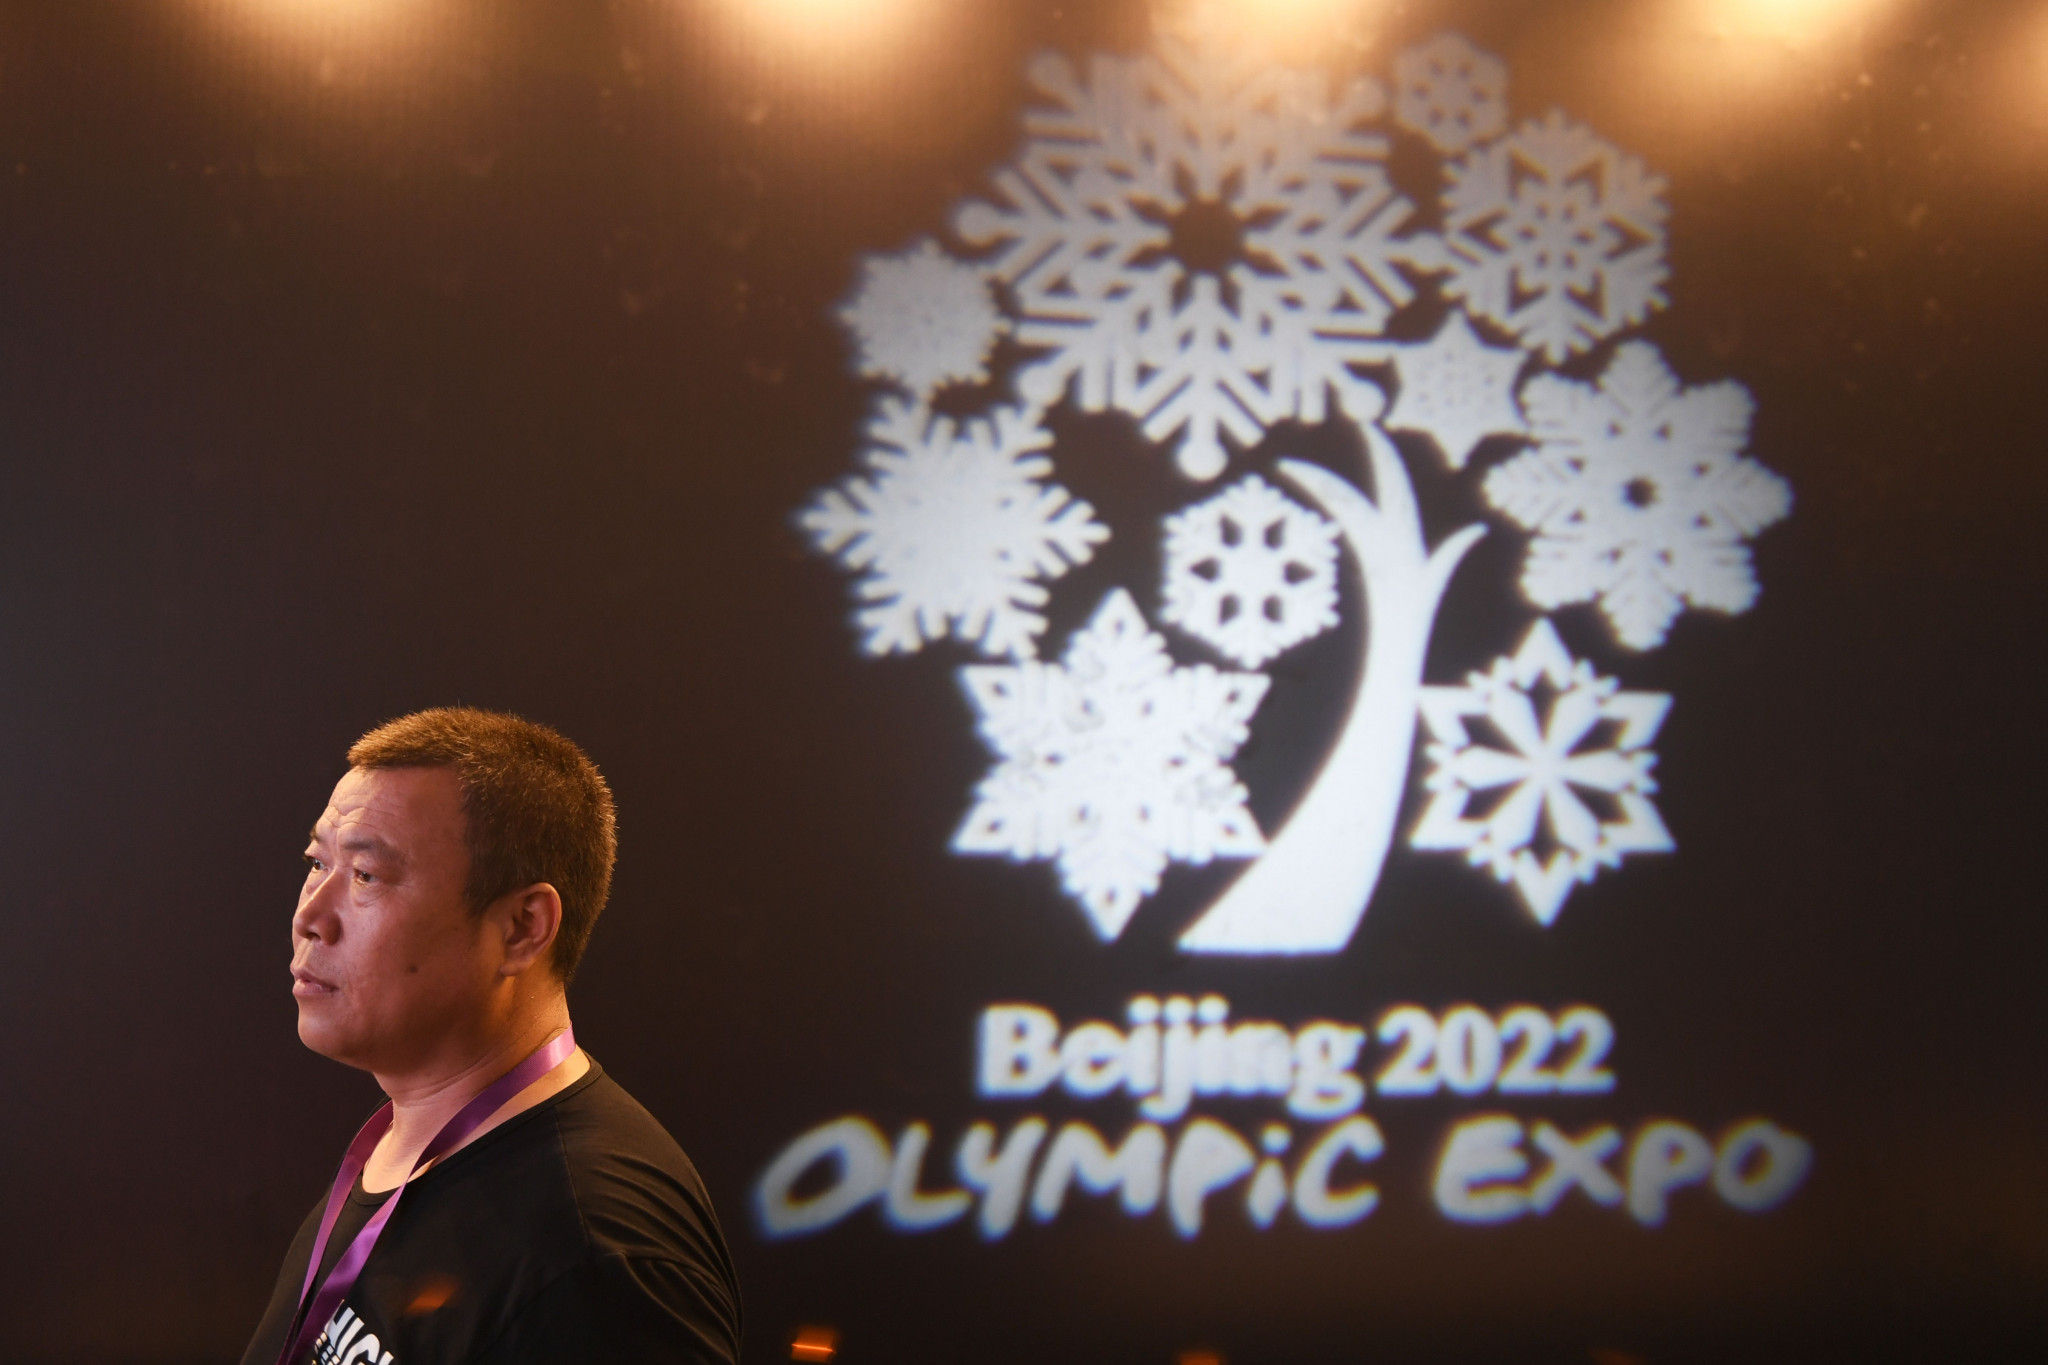 The competition was officially launched at an event held to mark 10 years since the Olympics began in Beijing ©Getty Images